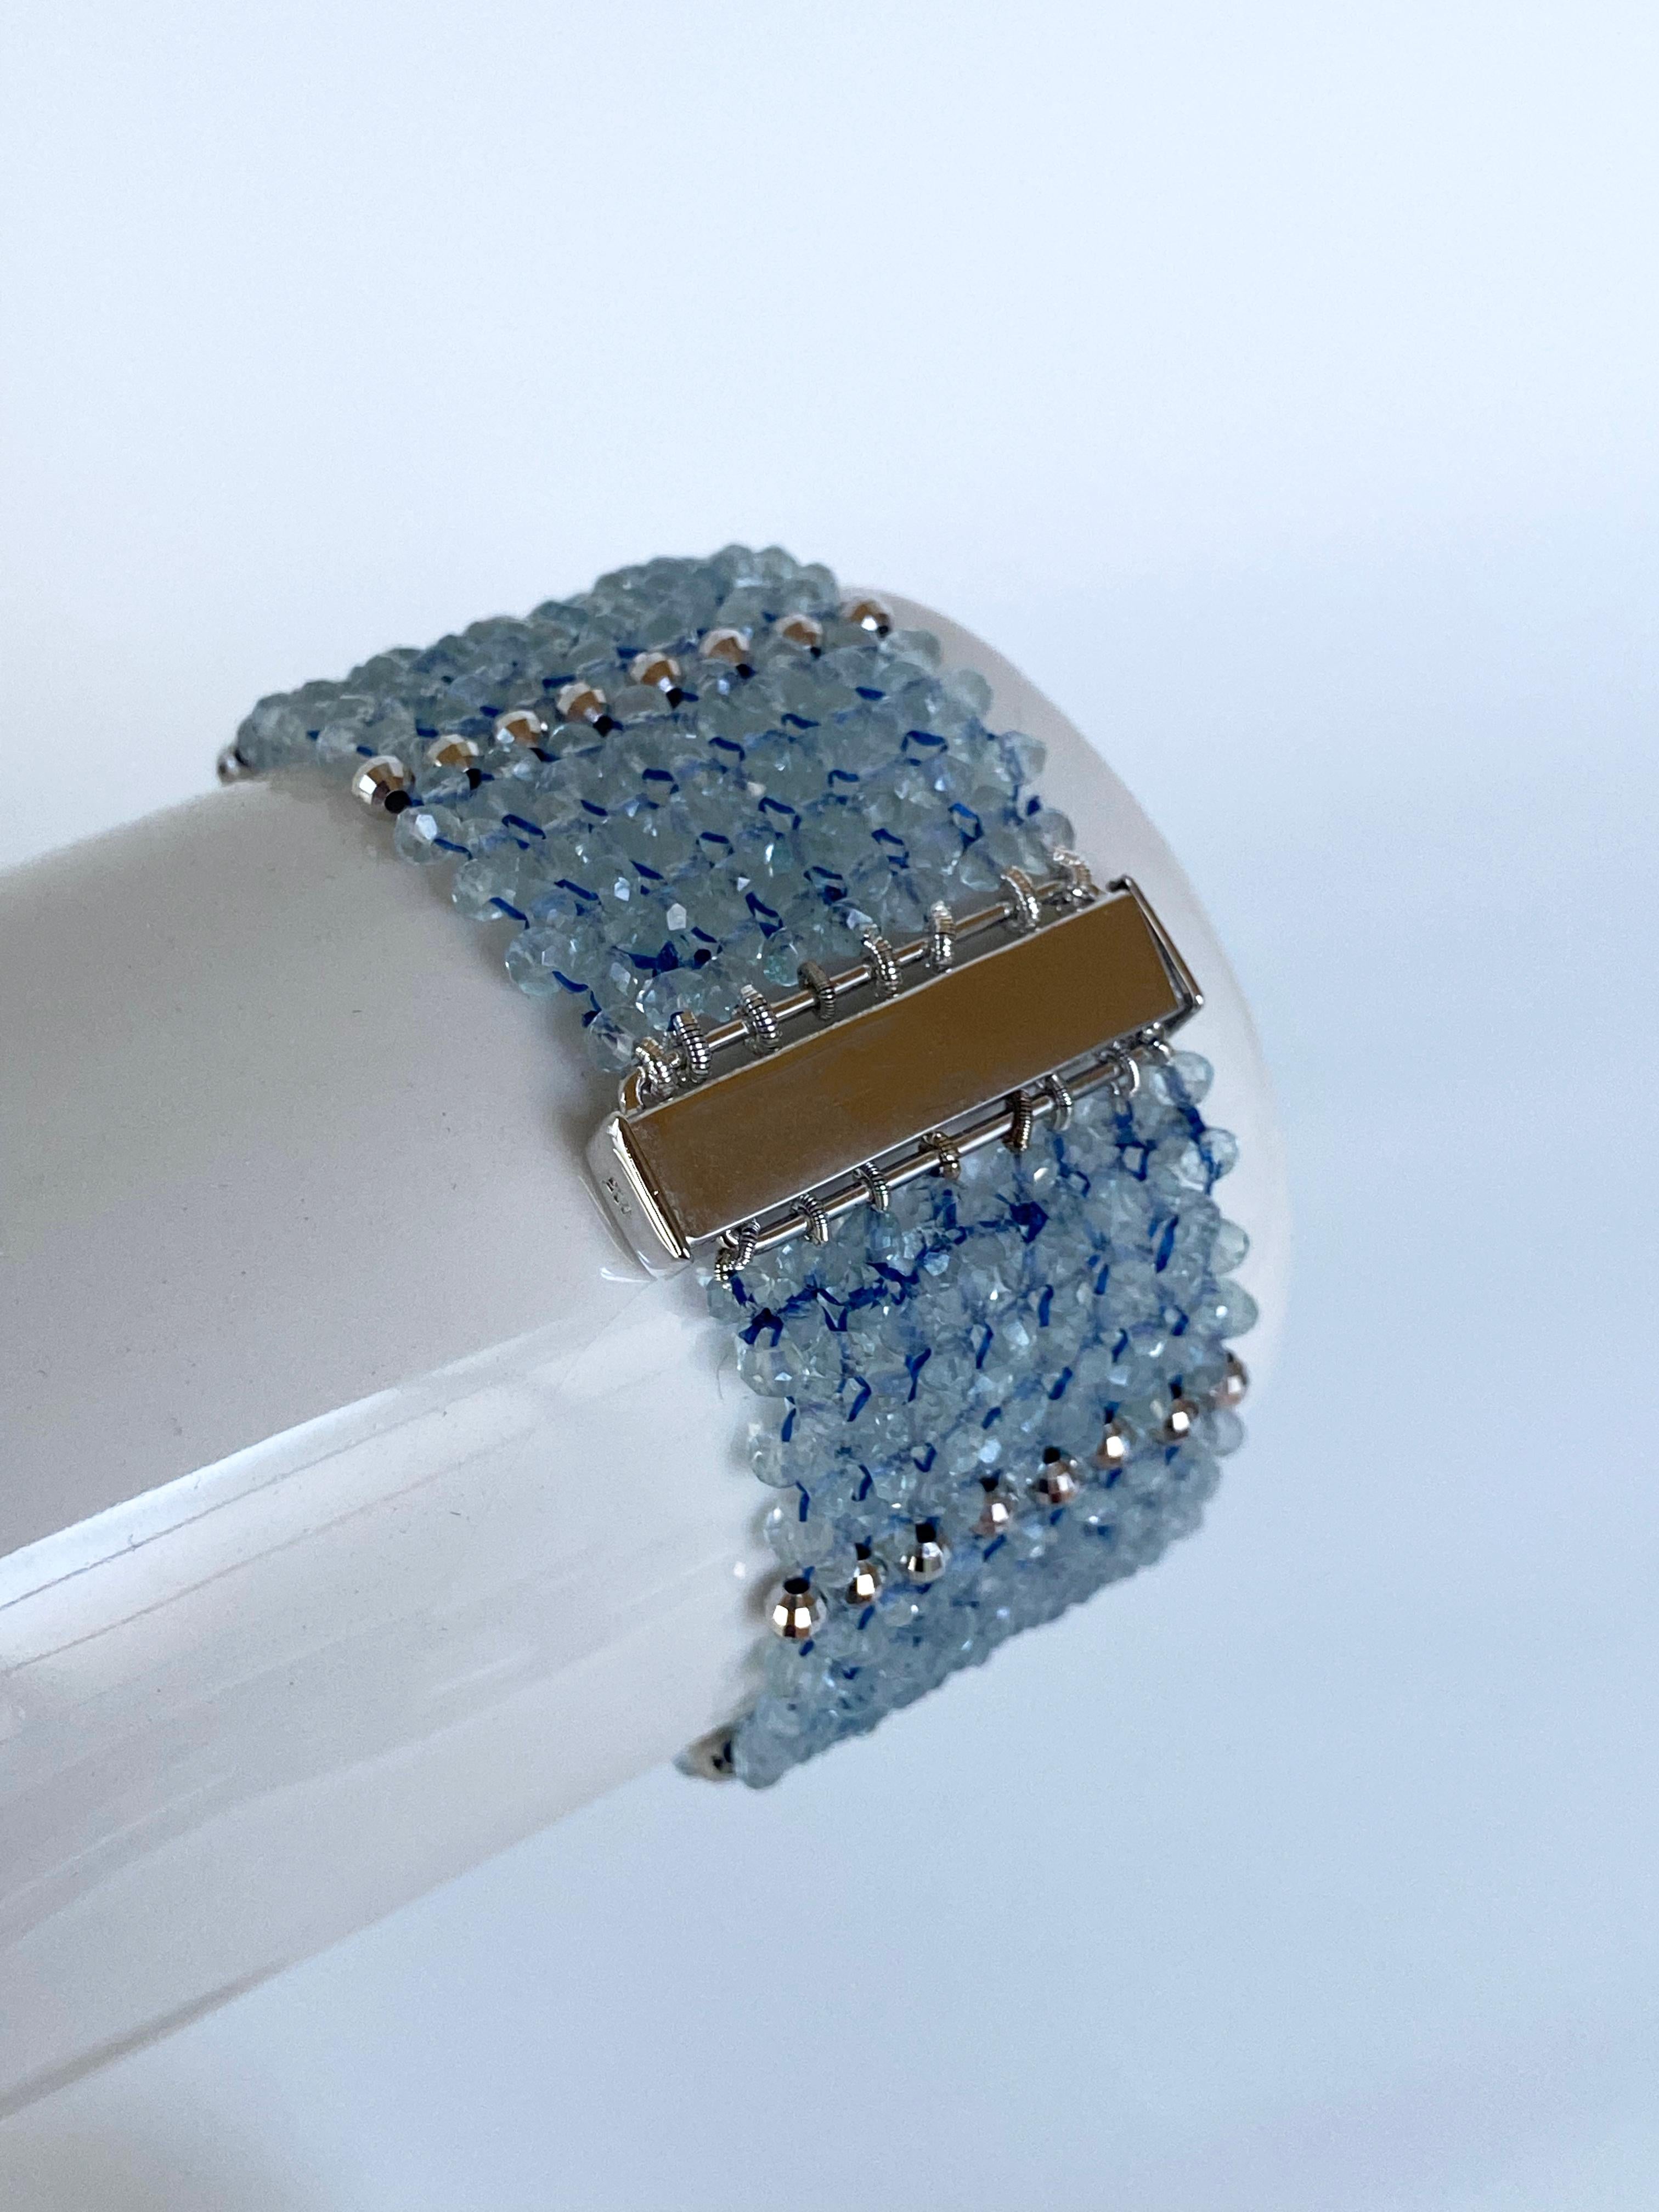 Gorgeous piece by Marina J. This bracelet features faceted Aquamarine stones with wonderful baby blue Pigment, woven together with faceted Rhodium Plated Sterling Silver 'Disco